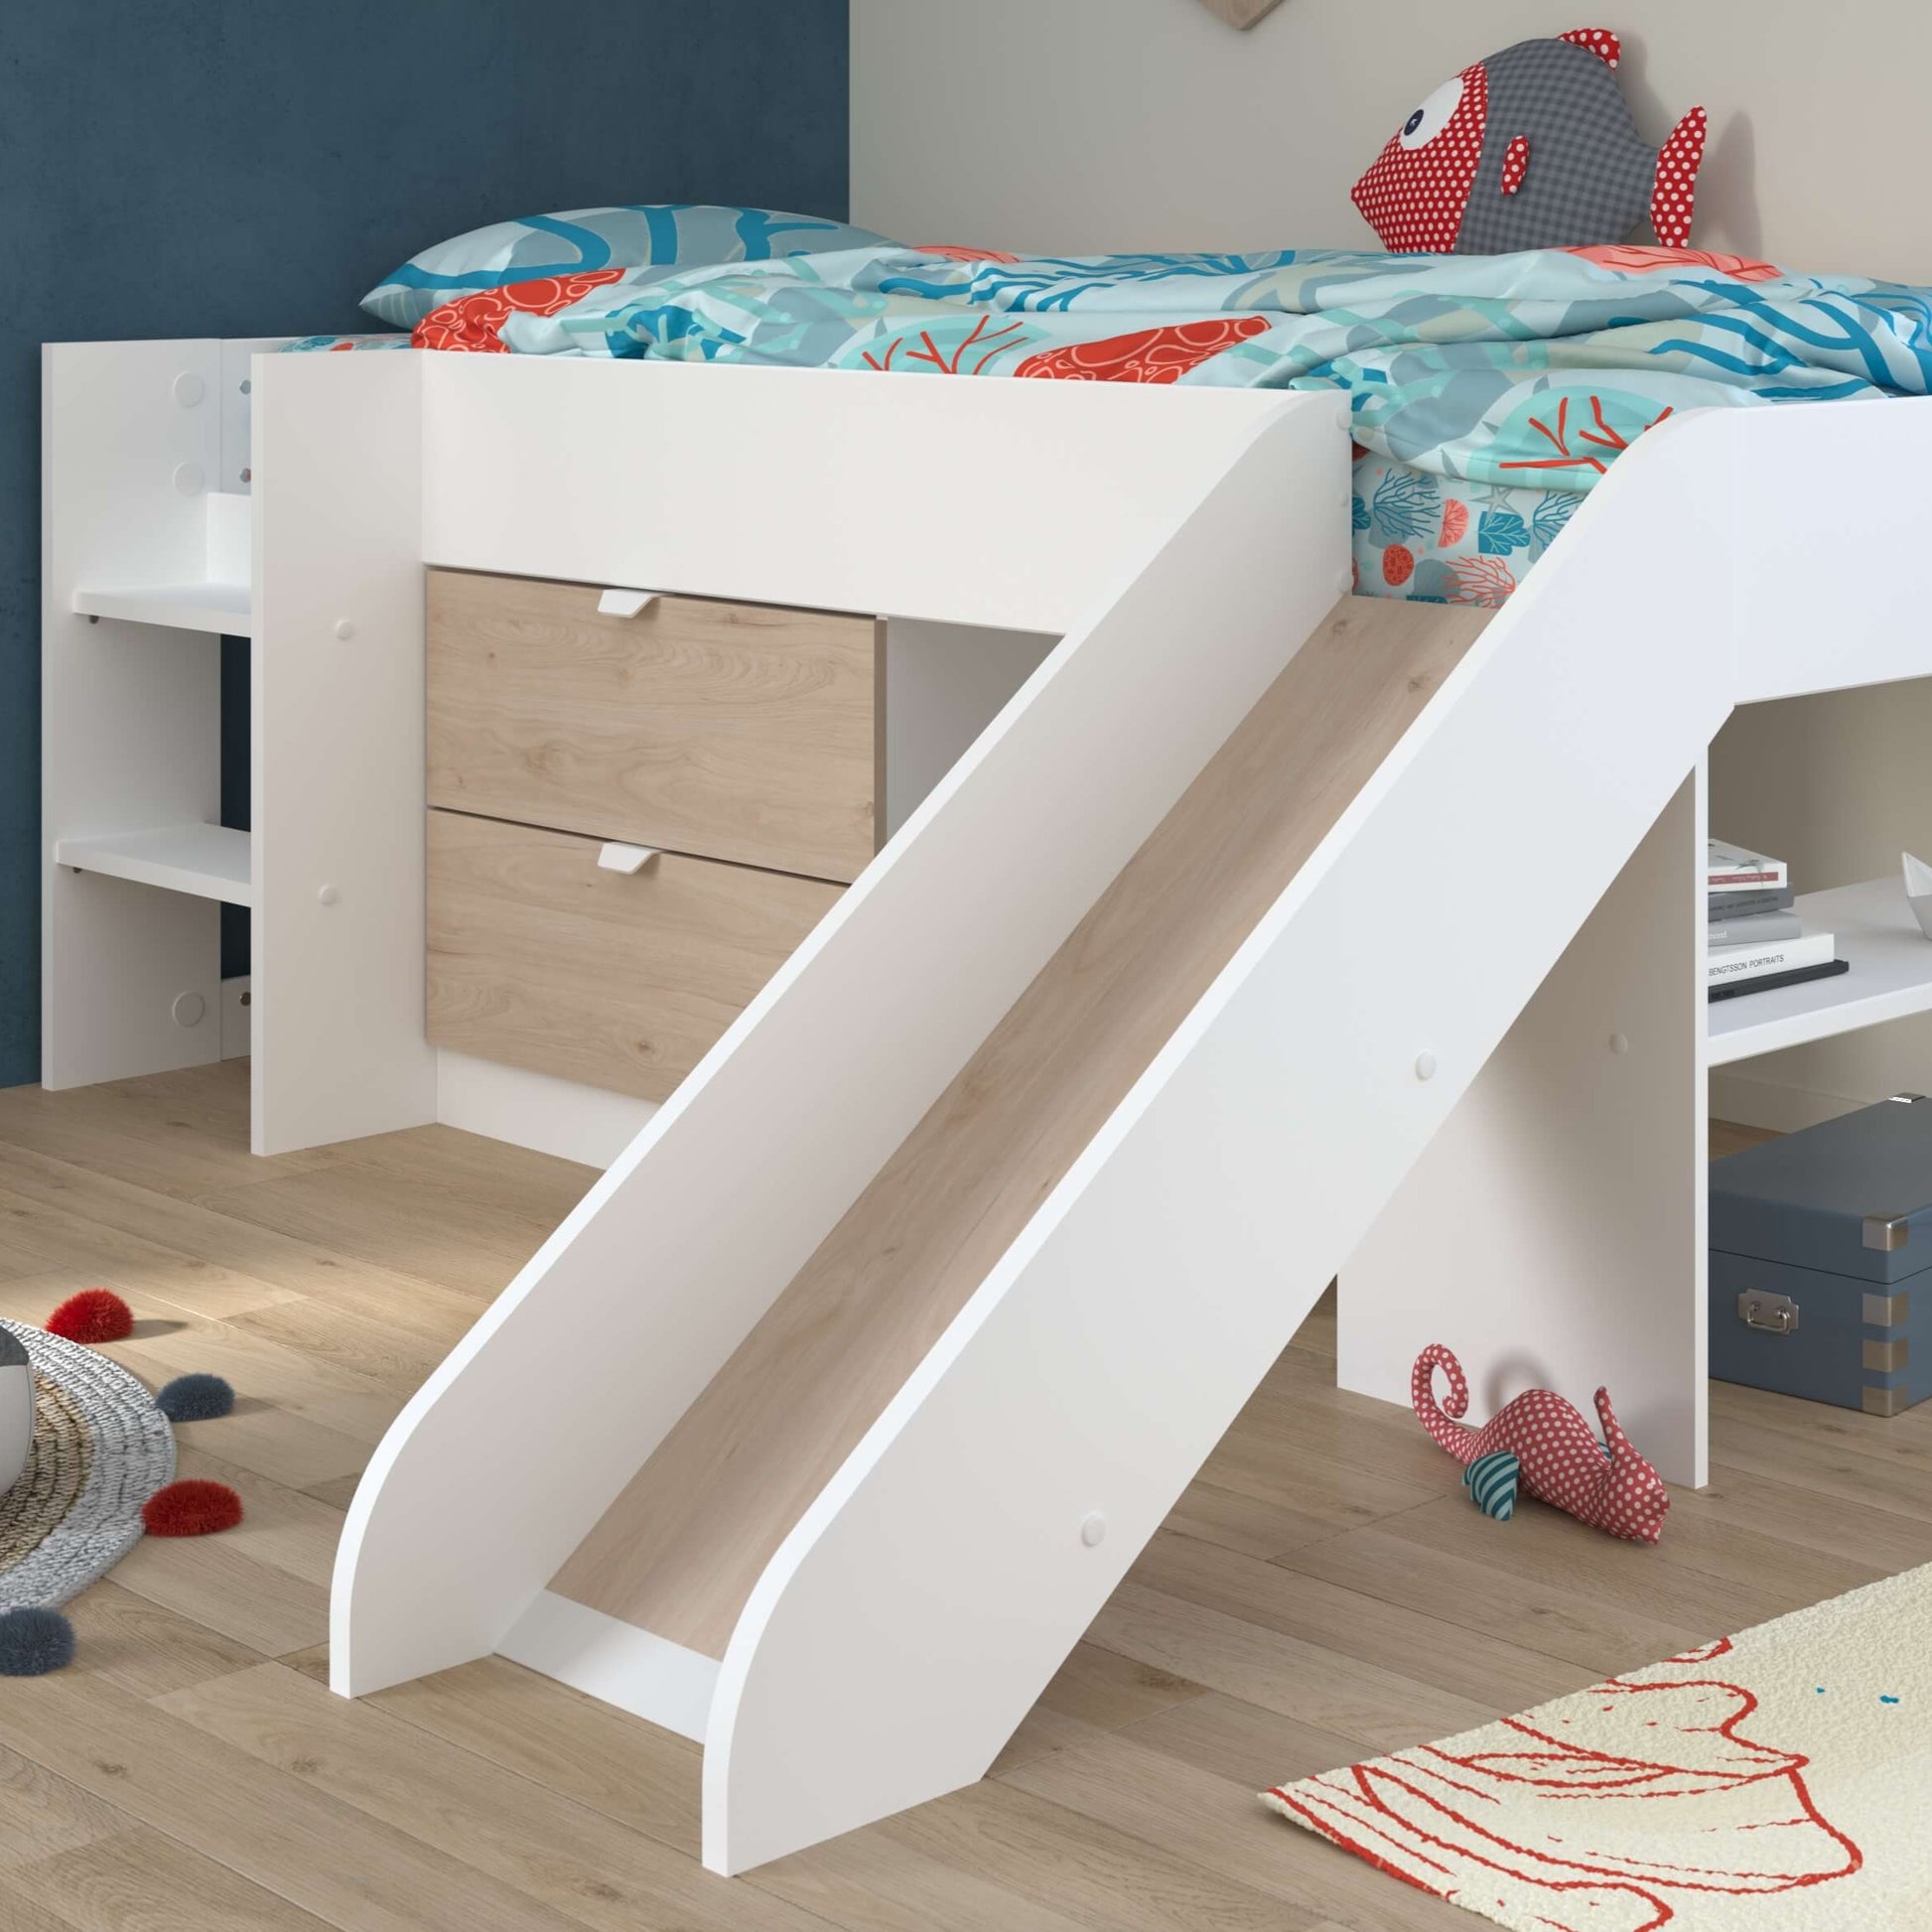 Tobo Mid Sleeper Bed with Slide & Drawers In Boys Room With Slide